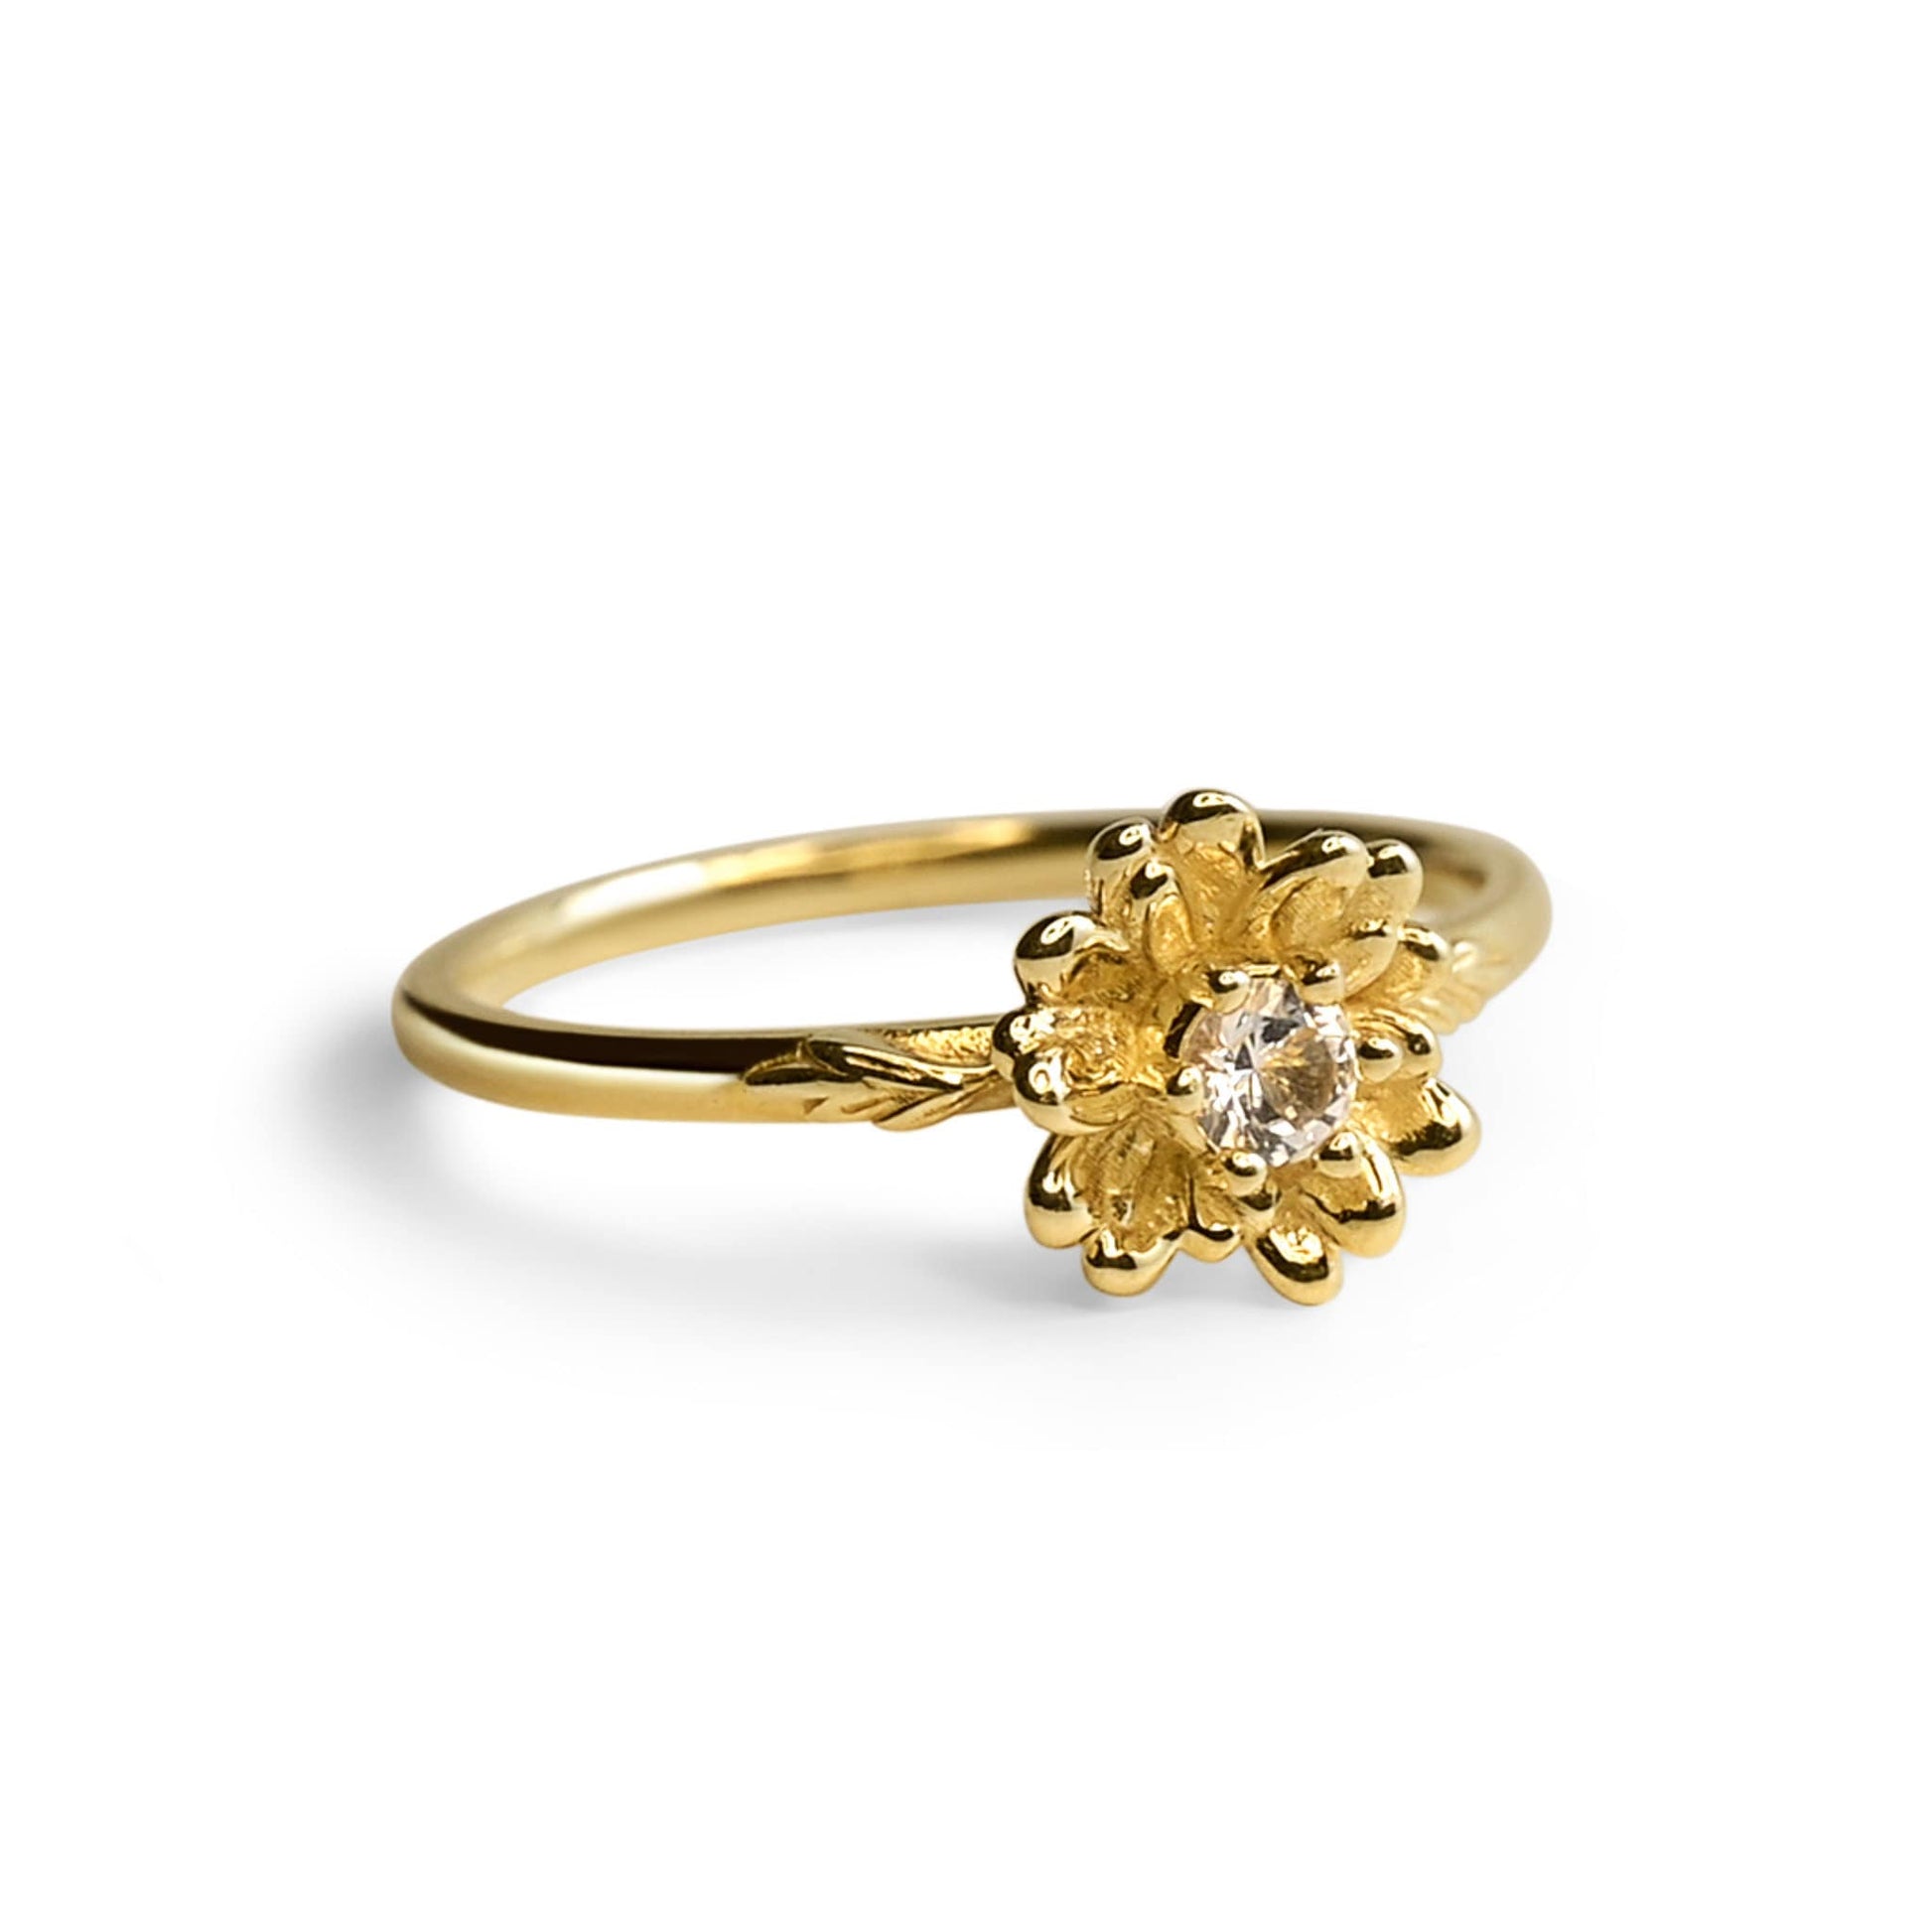 Daisy April Birth Month Ring: White Sapphire Birthstone, 14k Solid Gold or Solid Silver • Hypoallergenic • Genuine Gemstones